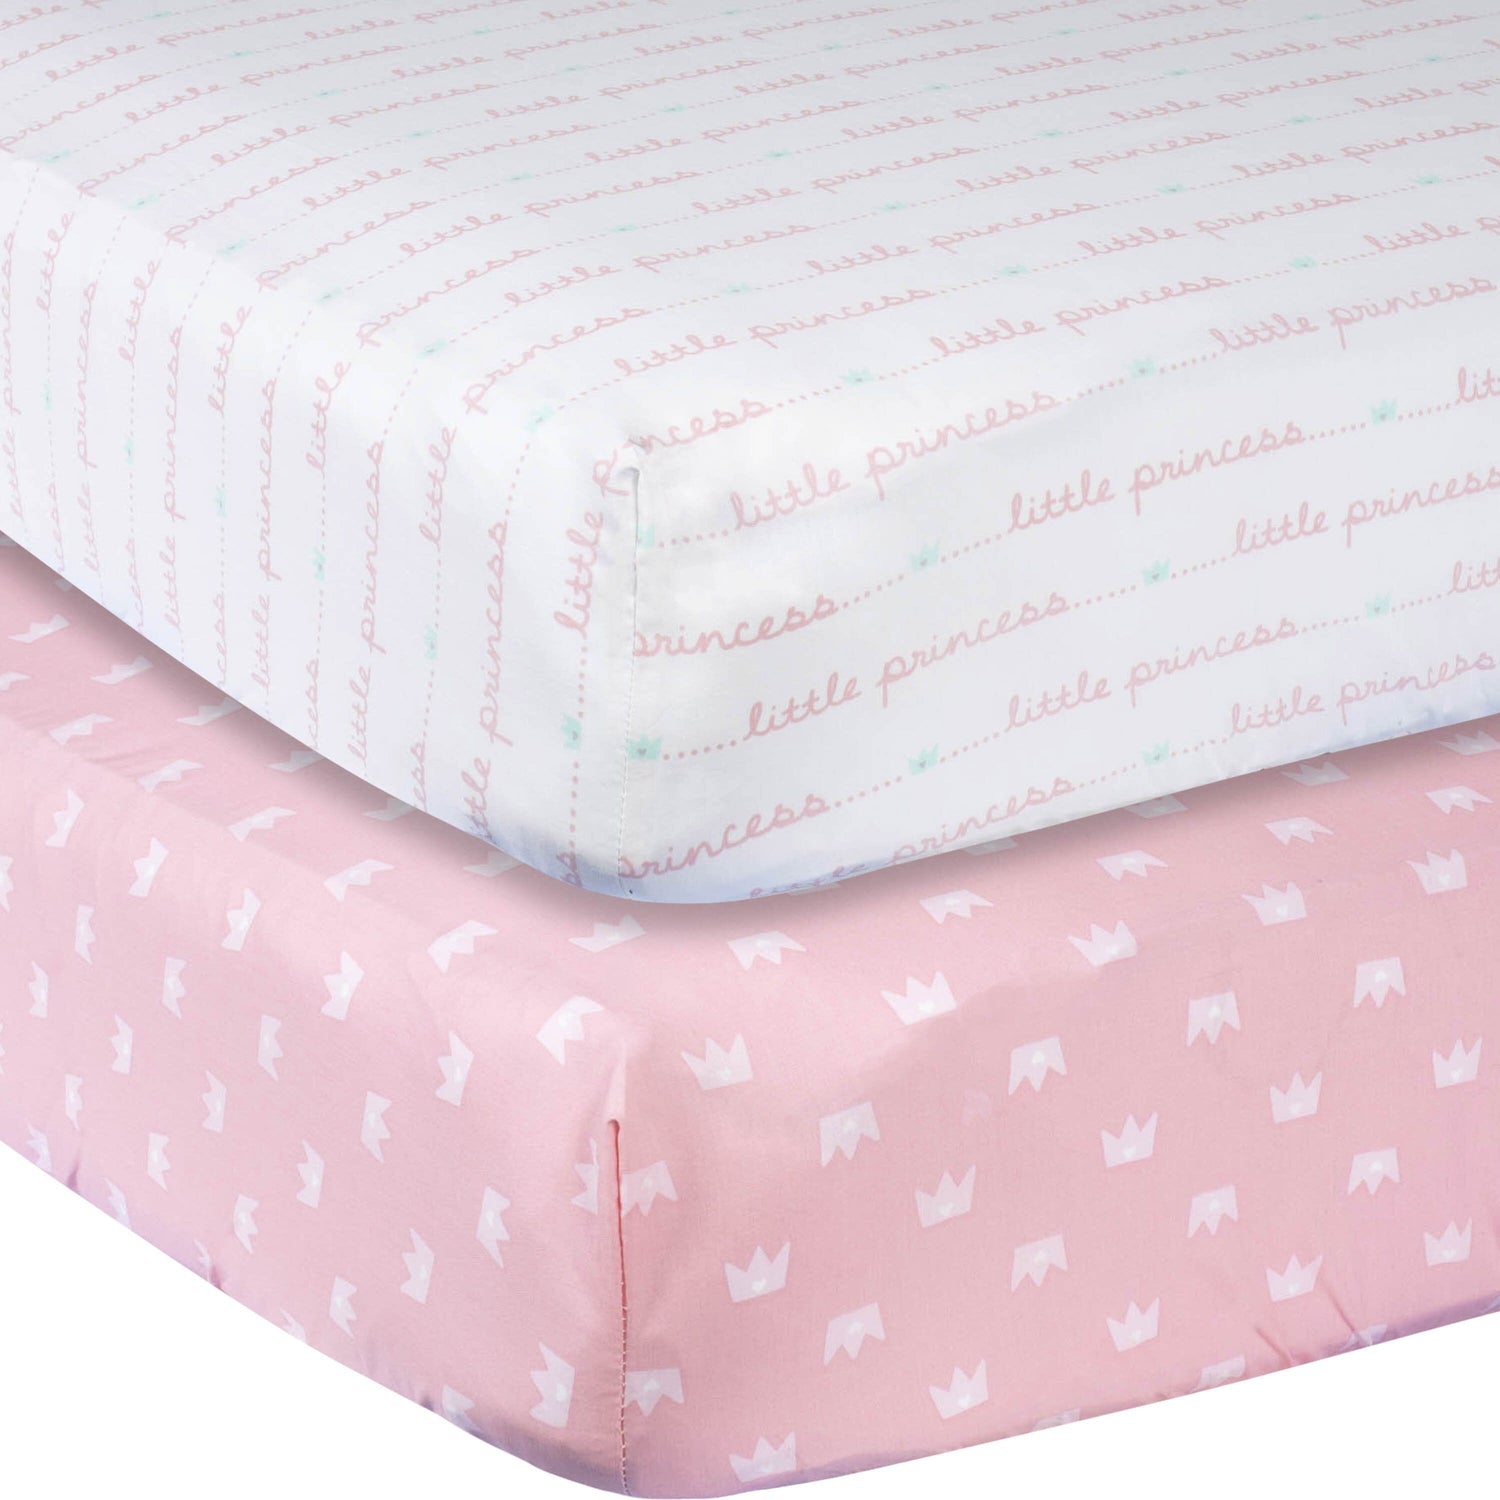 baby girl fitted cot sheets